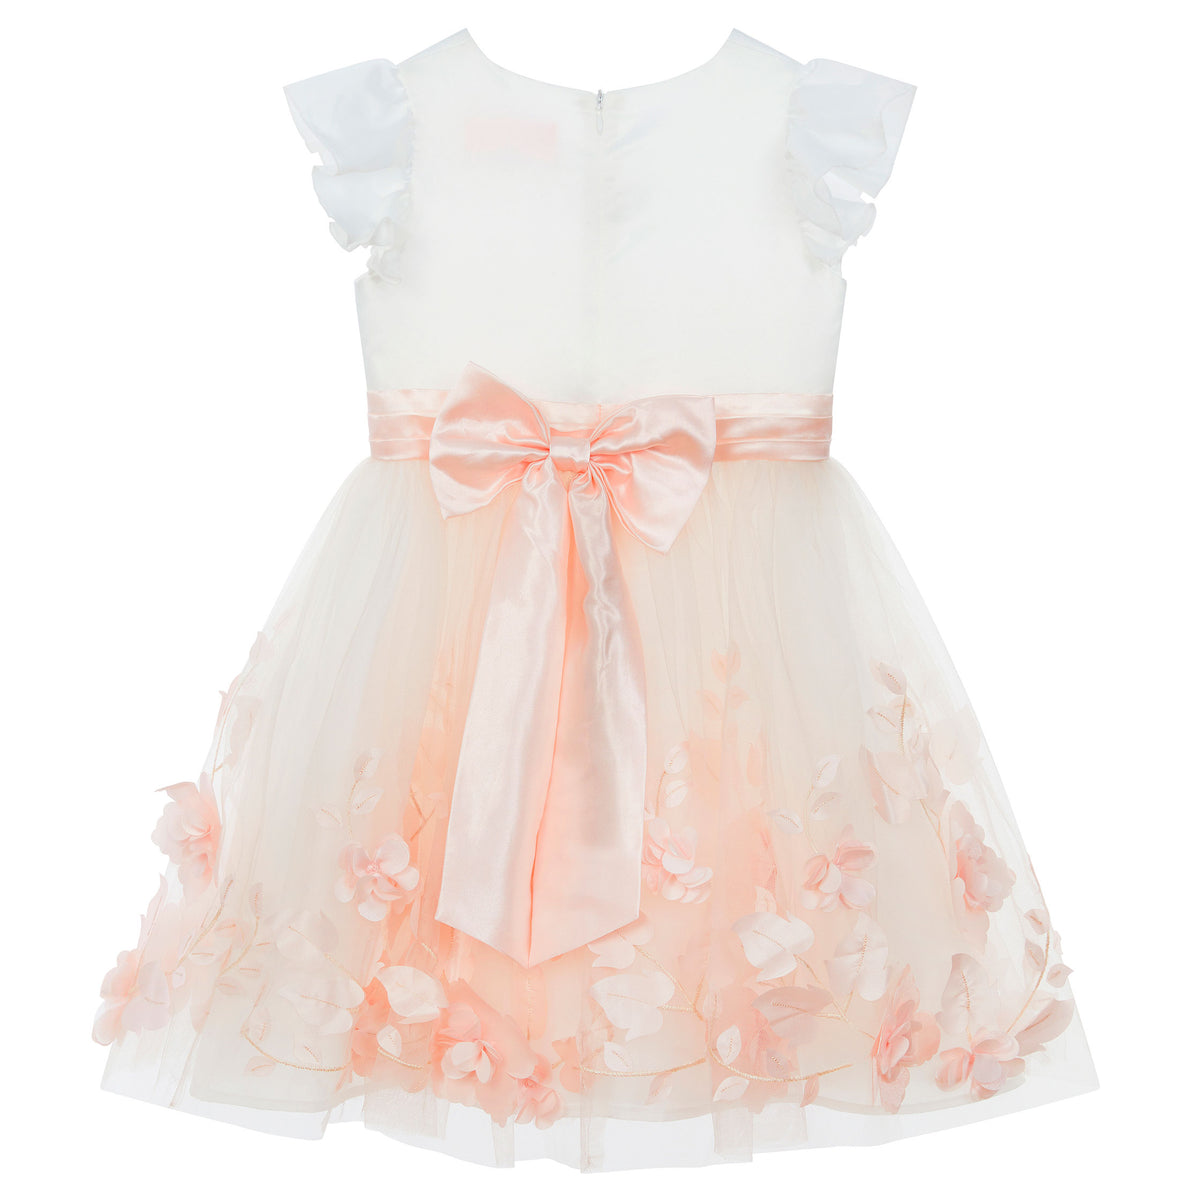 Rose Petal Embellished Girls Occasion Dress Pink & White | Holly Hastie London